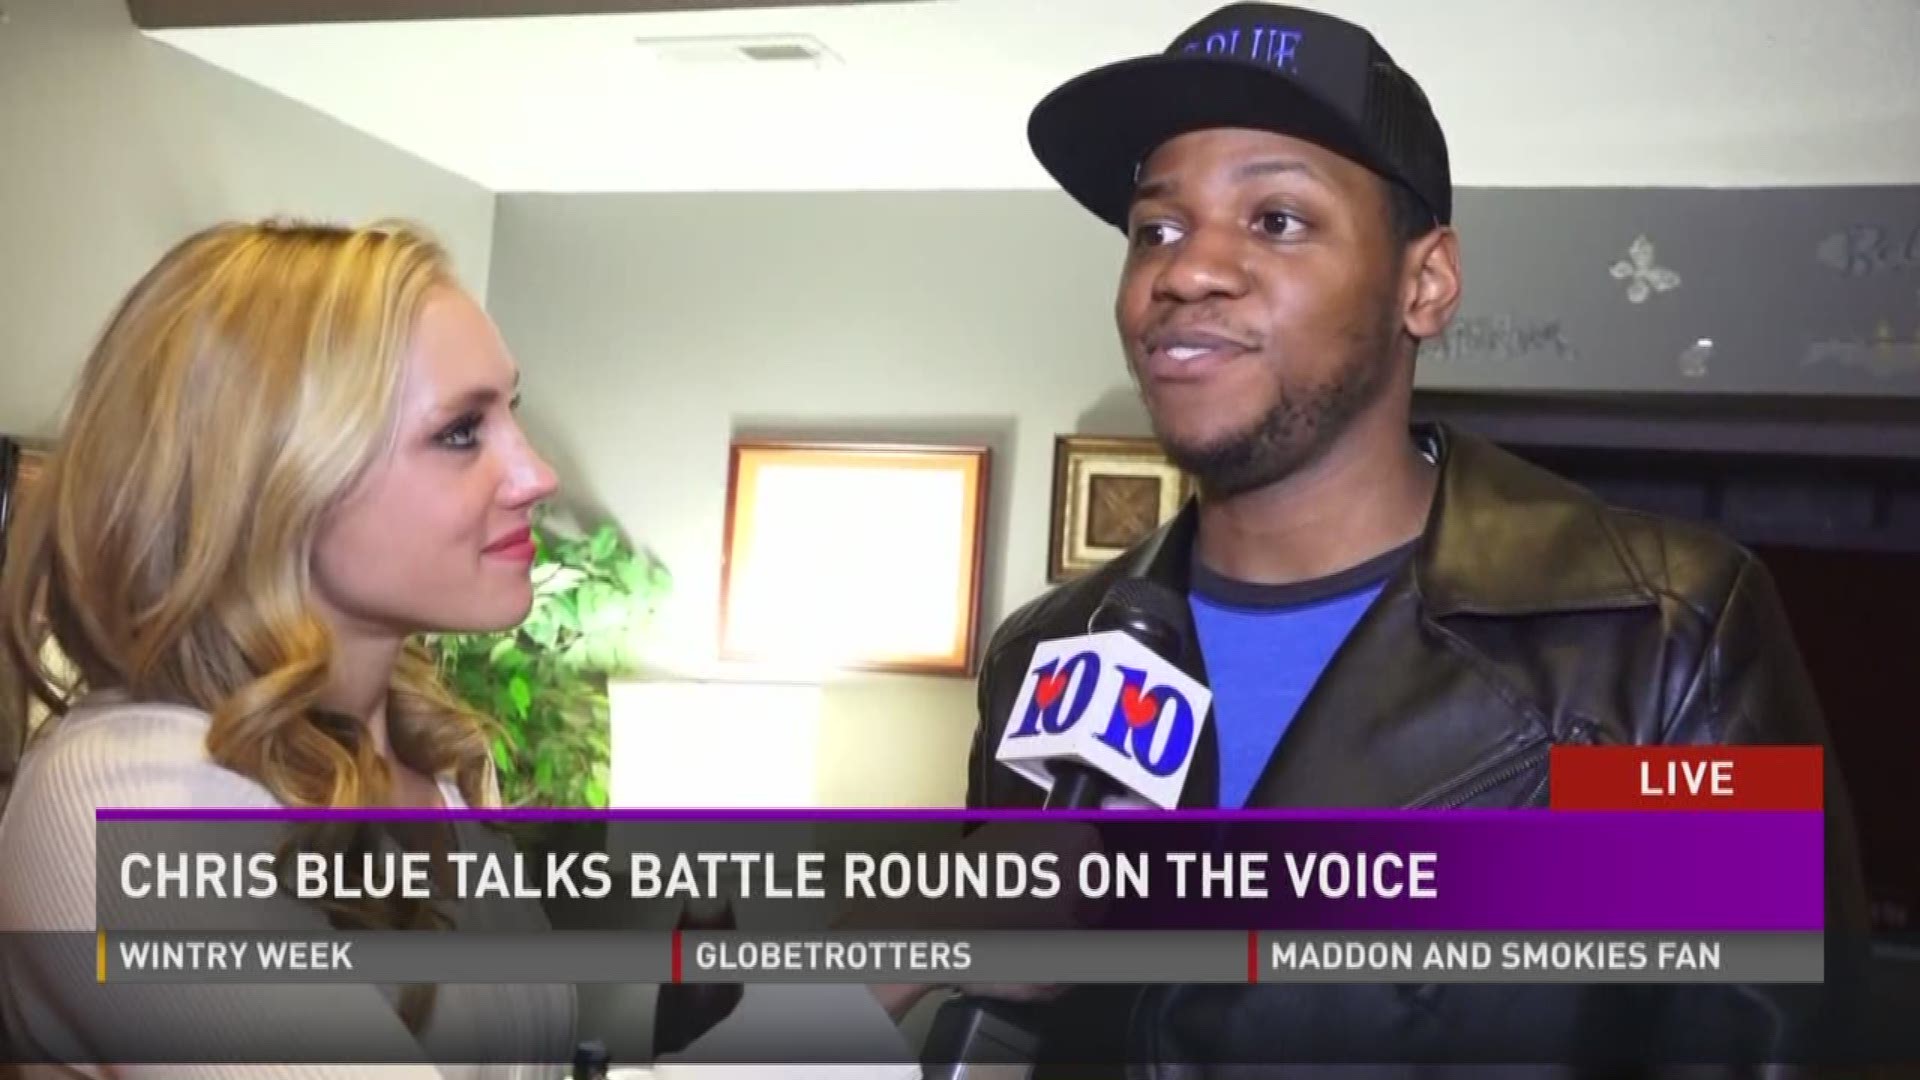 March 14, 2017: Chris Blue talks about his experience competing on NBC's The Voice.